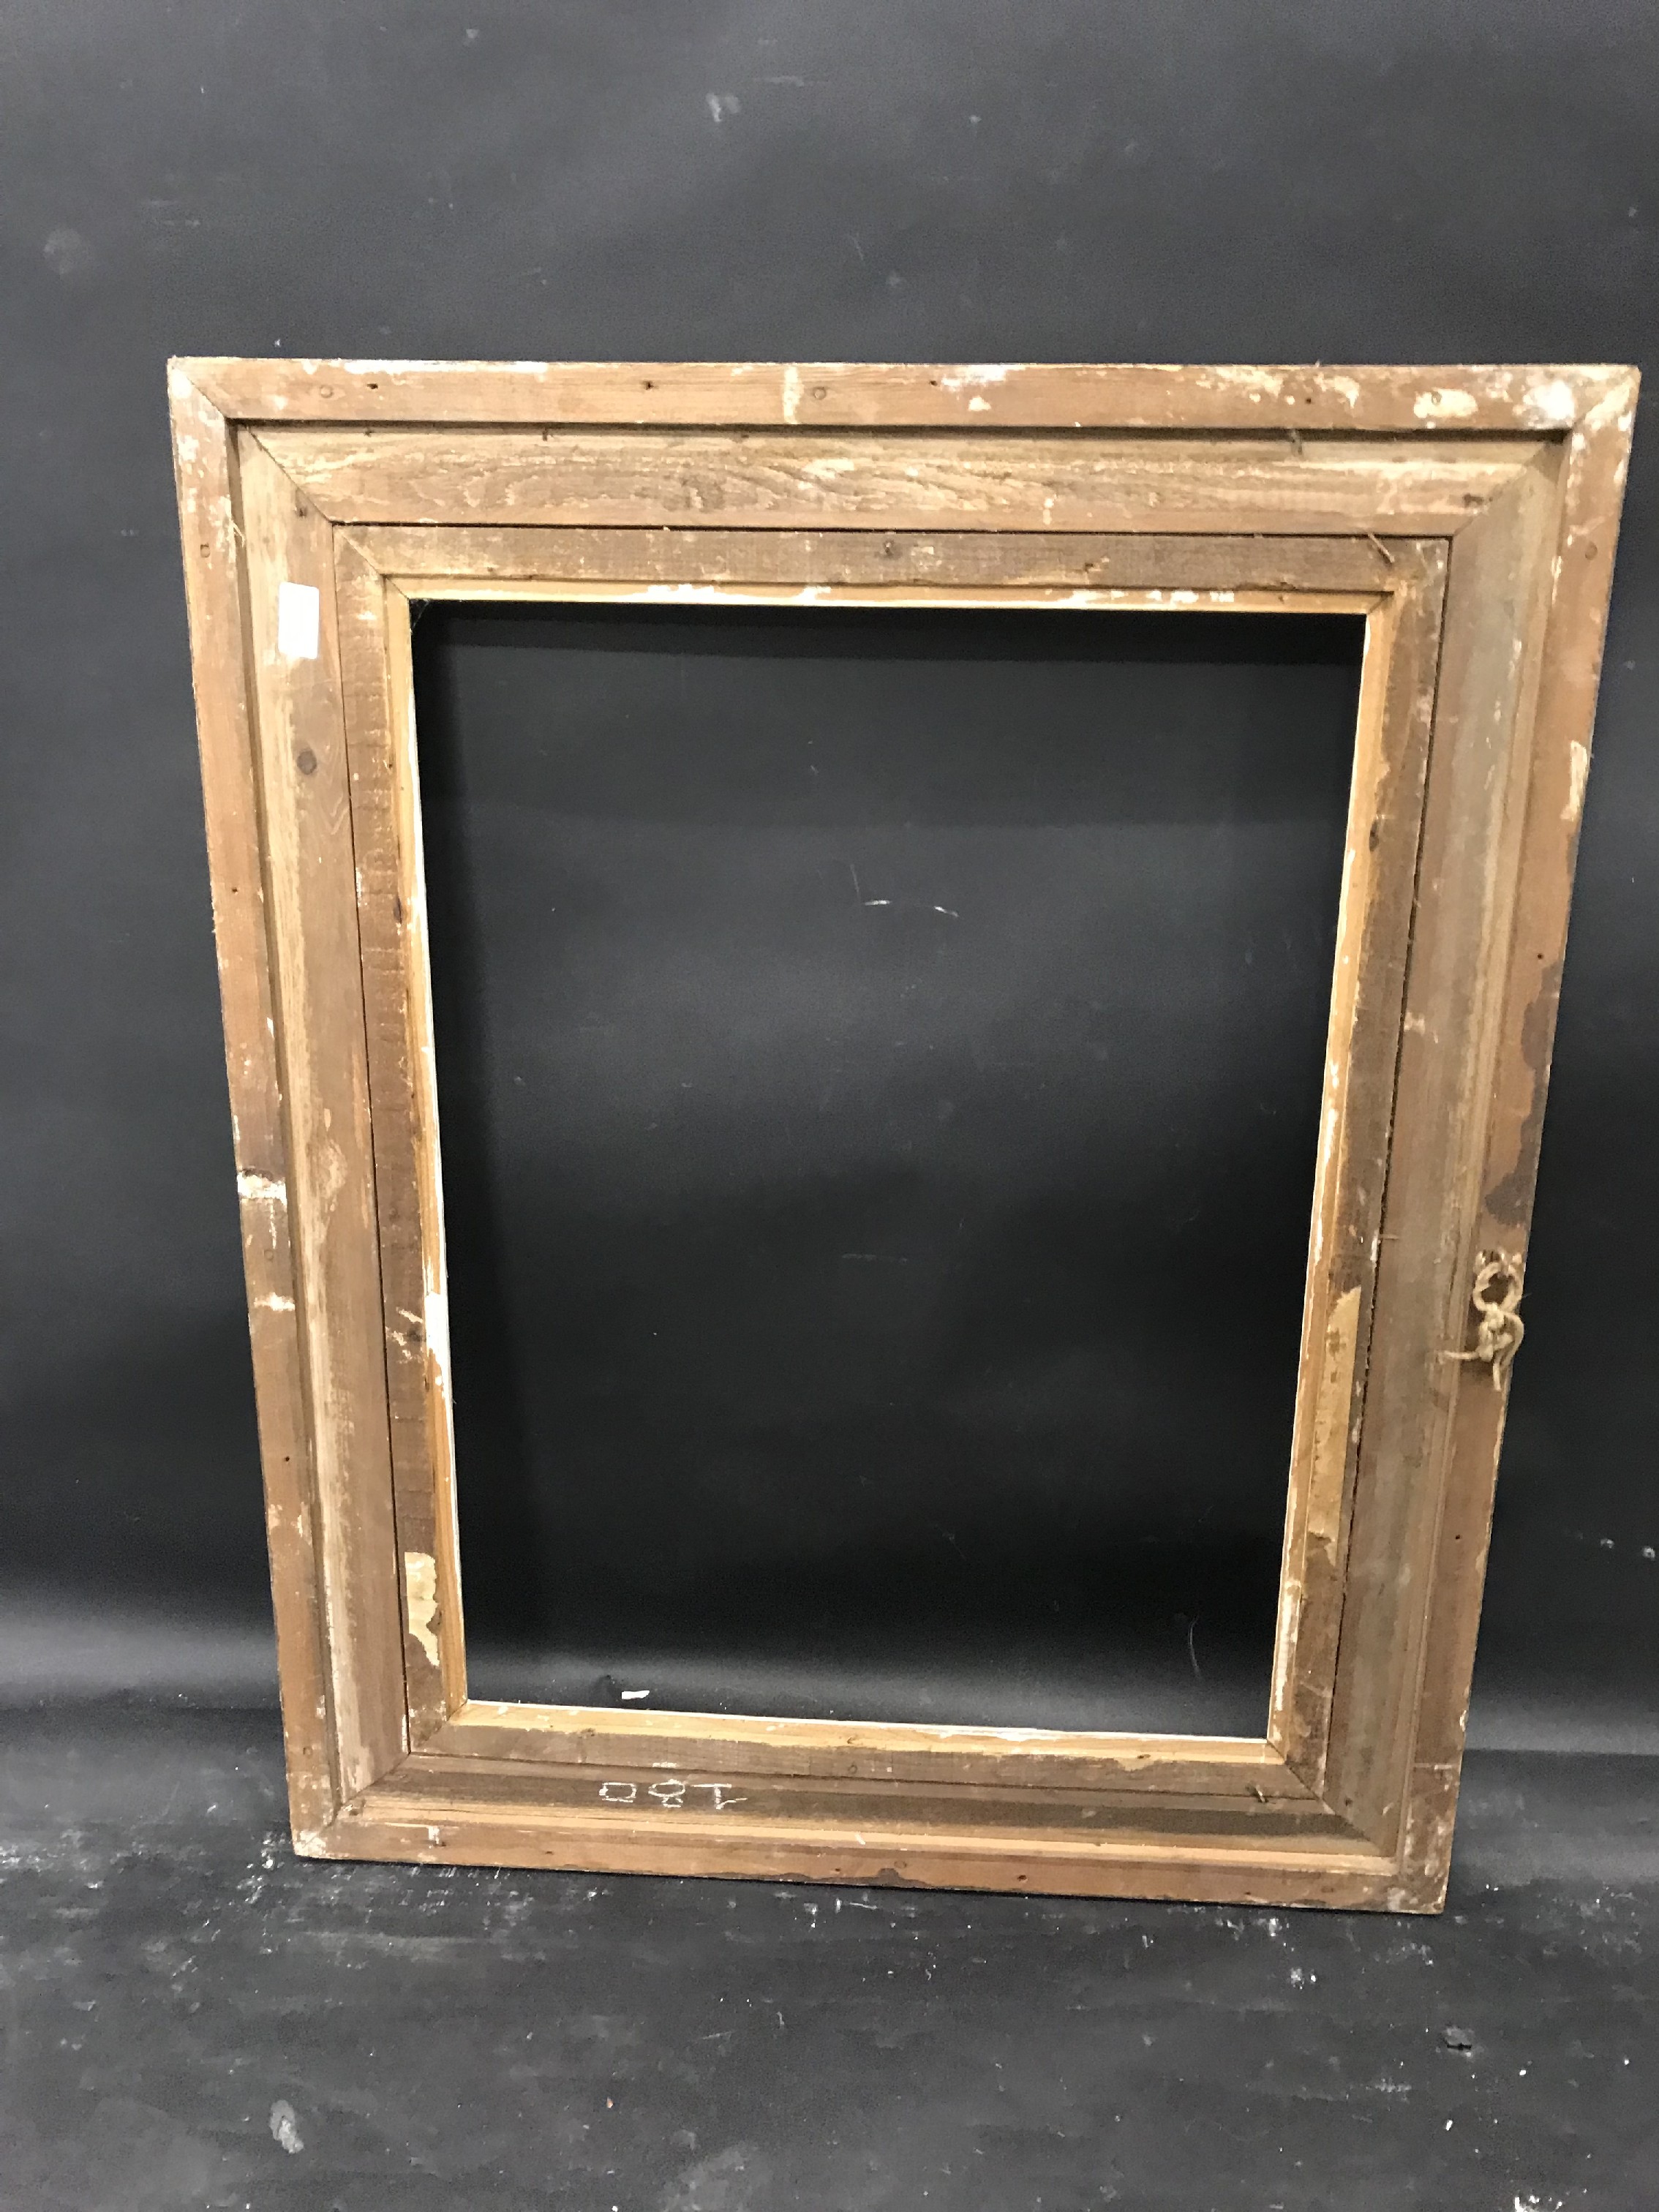 20th Century European School. A Carved Giltwood Frame, with a white inner slip, 24" x 18" (rebate). - Image 3 of 3